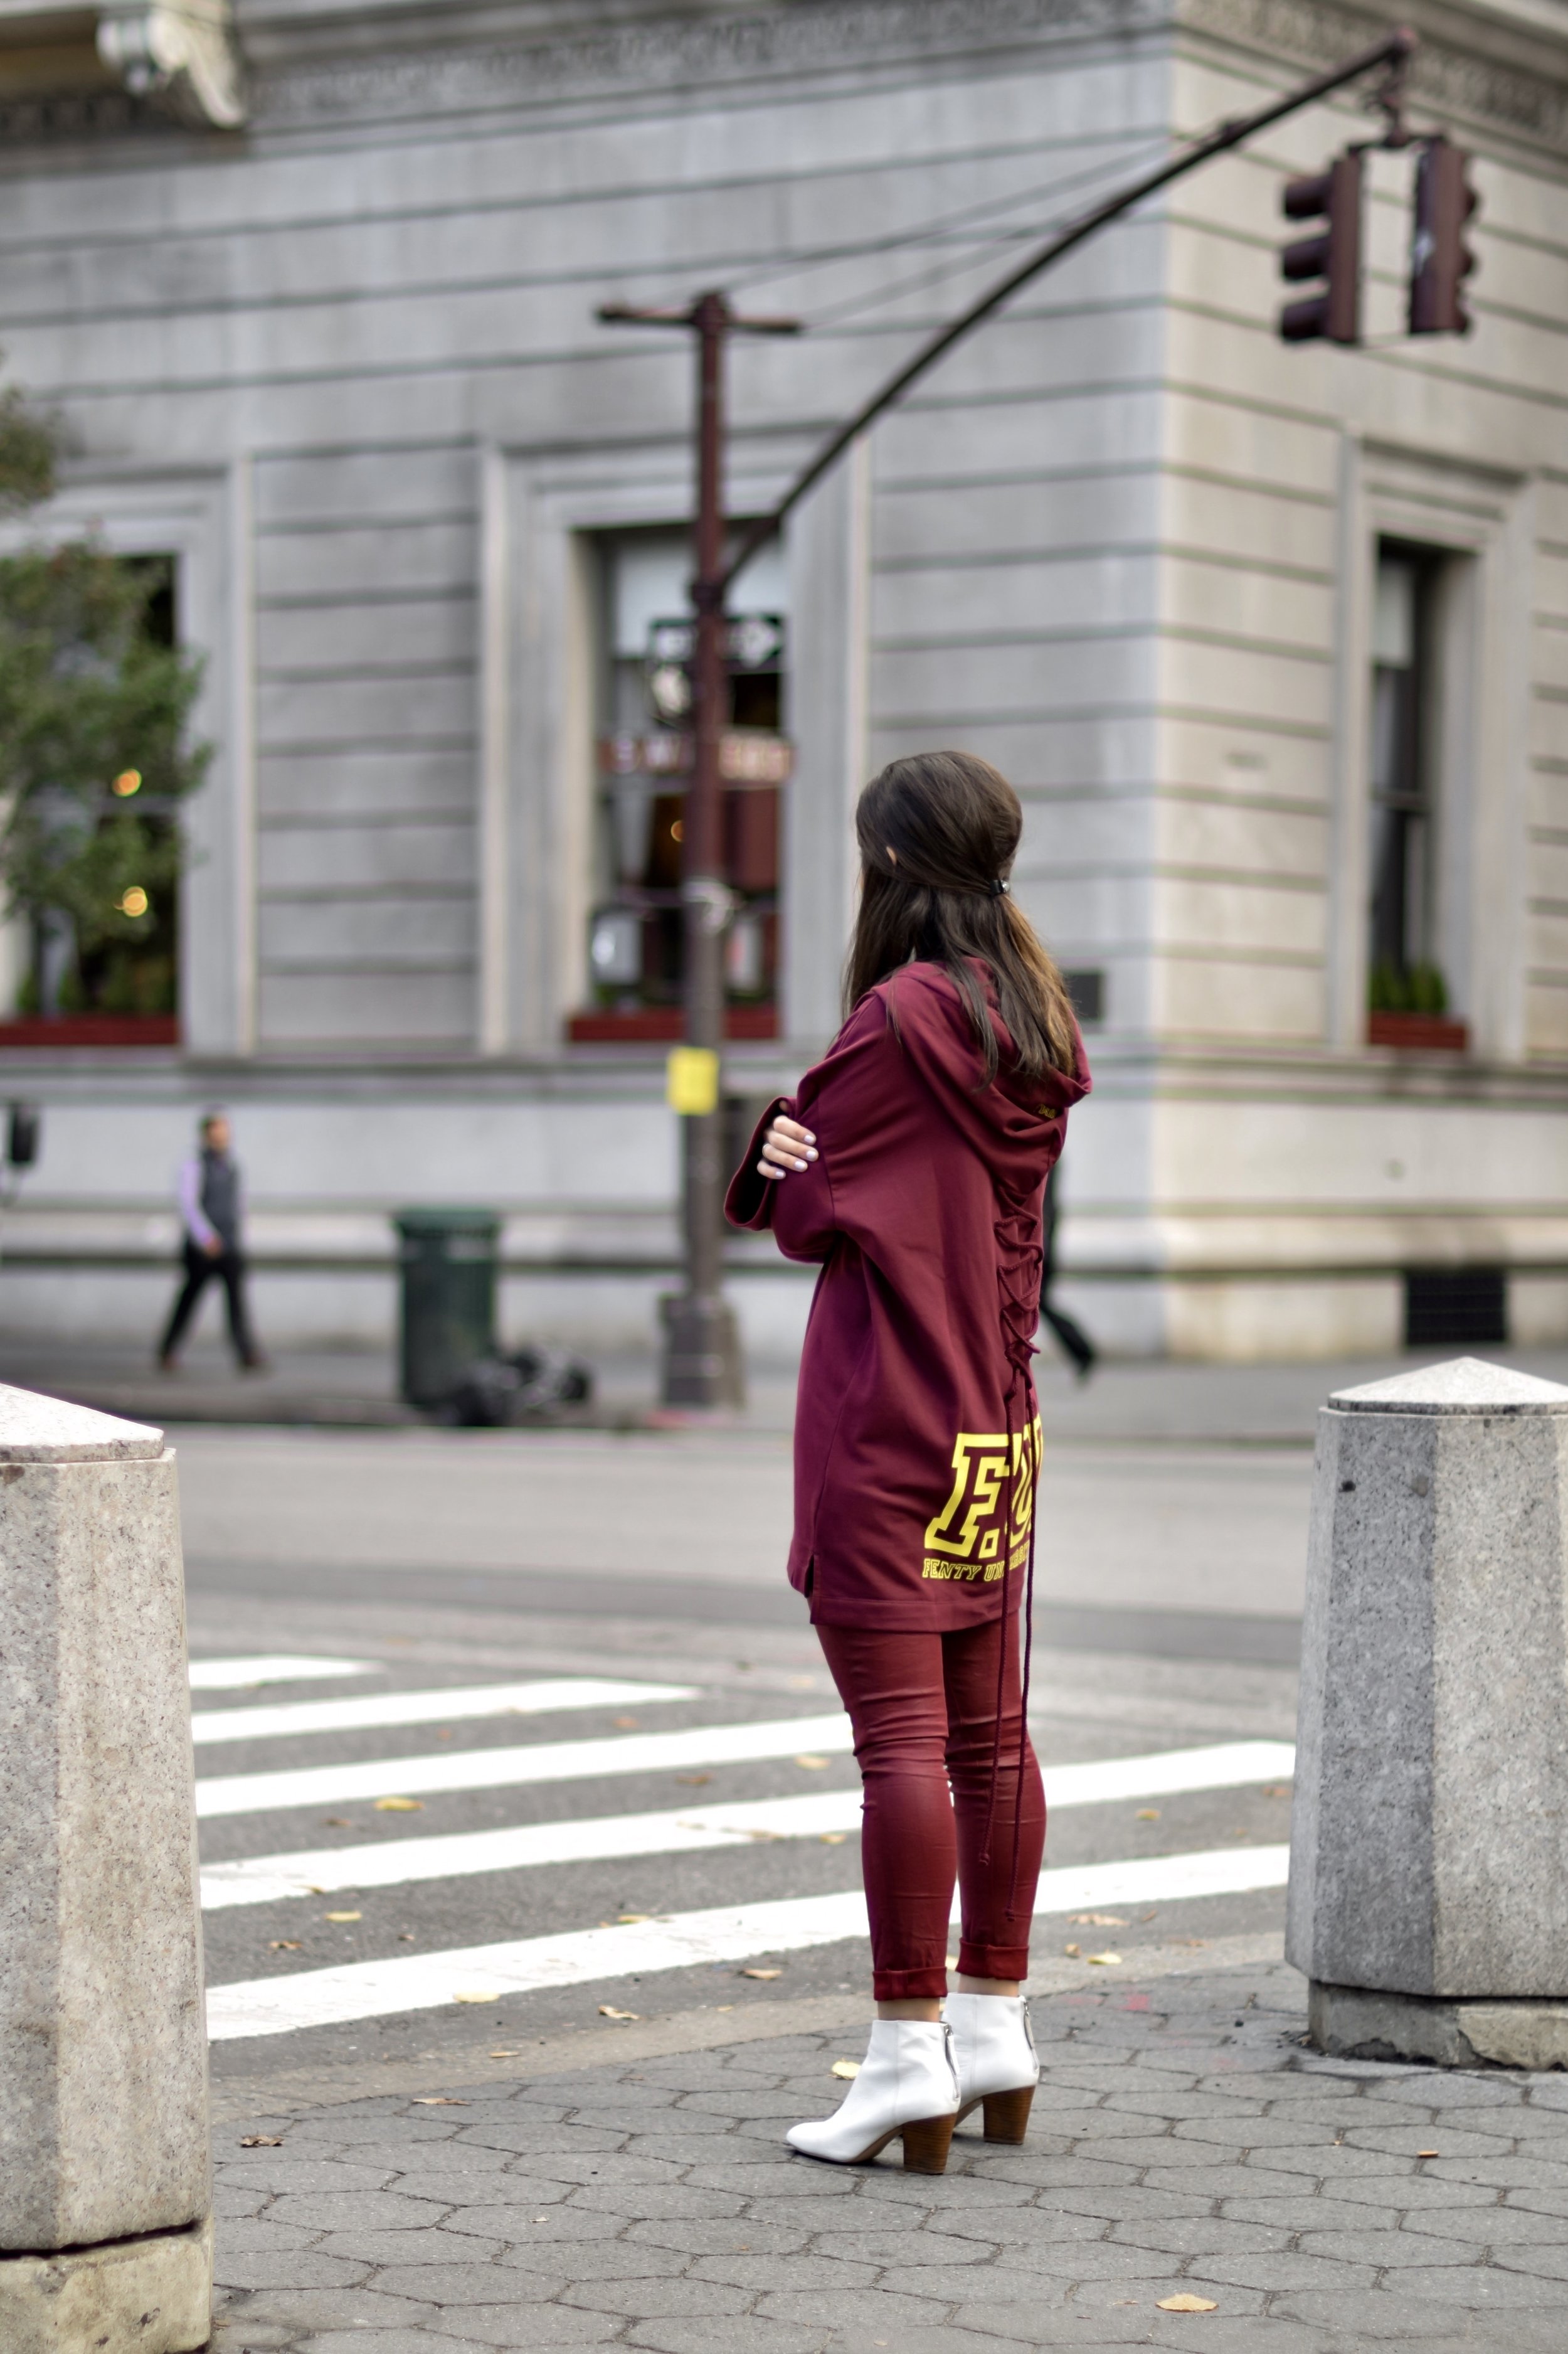 What Do Bloggers Still Pay For Monochrome Maroon Outfit White Booties Esther Santer Fashion Blog NYC Street Style Blogger Outfit OOTD Trendy Burgundy Color AG Jeans Fenty Puma Rihanna Oversized Sweatshirt Girl Women Shopping Winter Fall Look New York.jpg